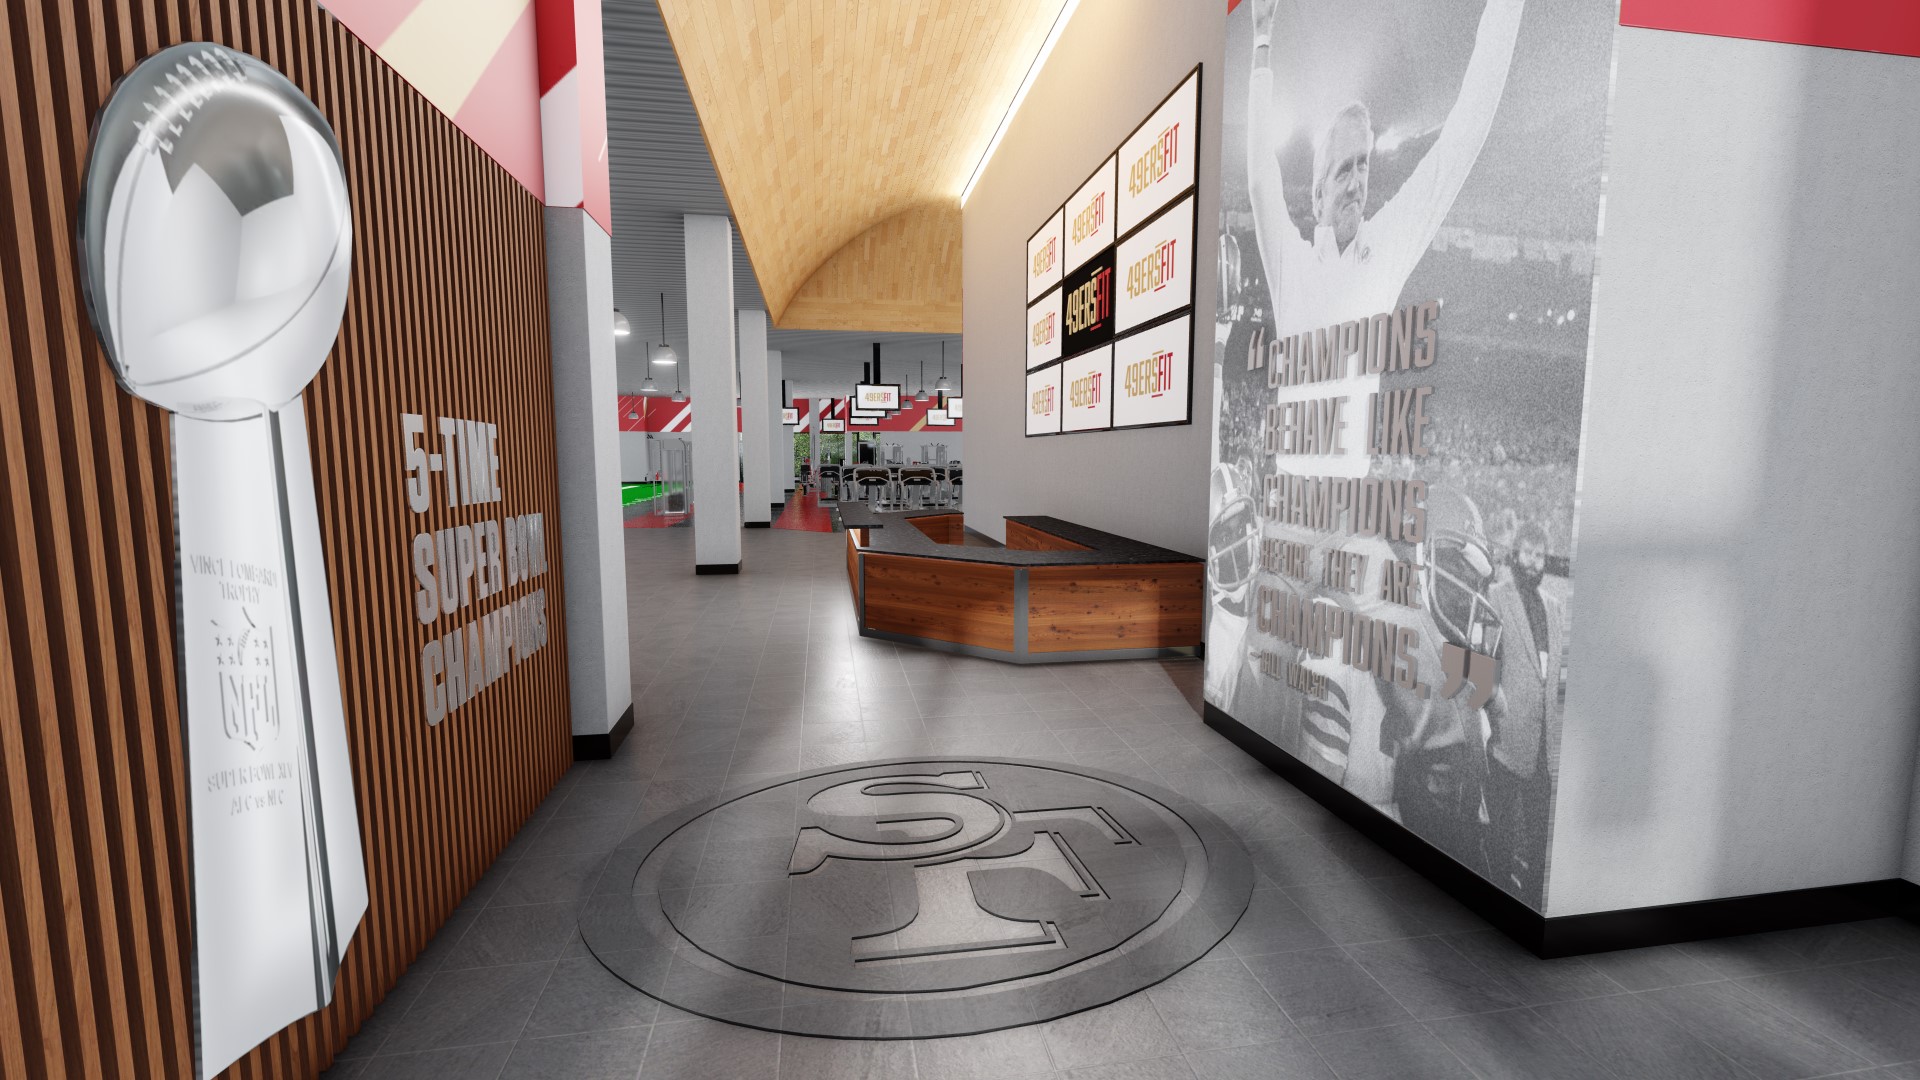 49ers to open teamthemed fitness center in San Jose